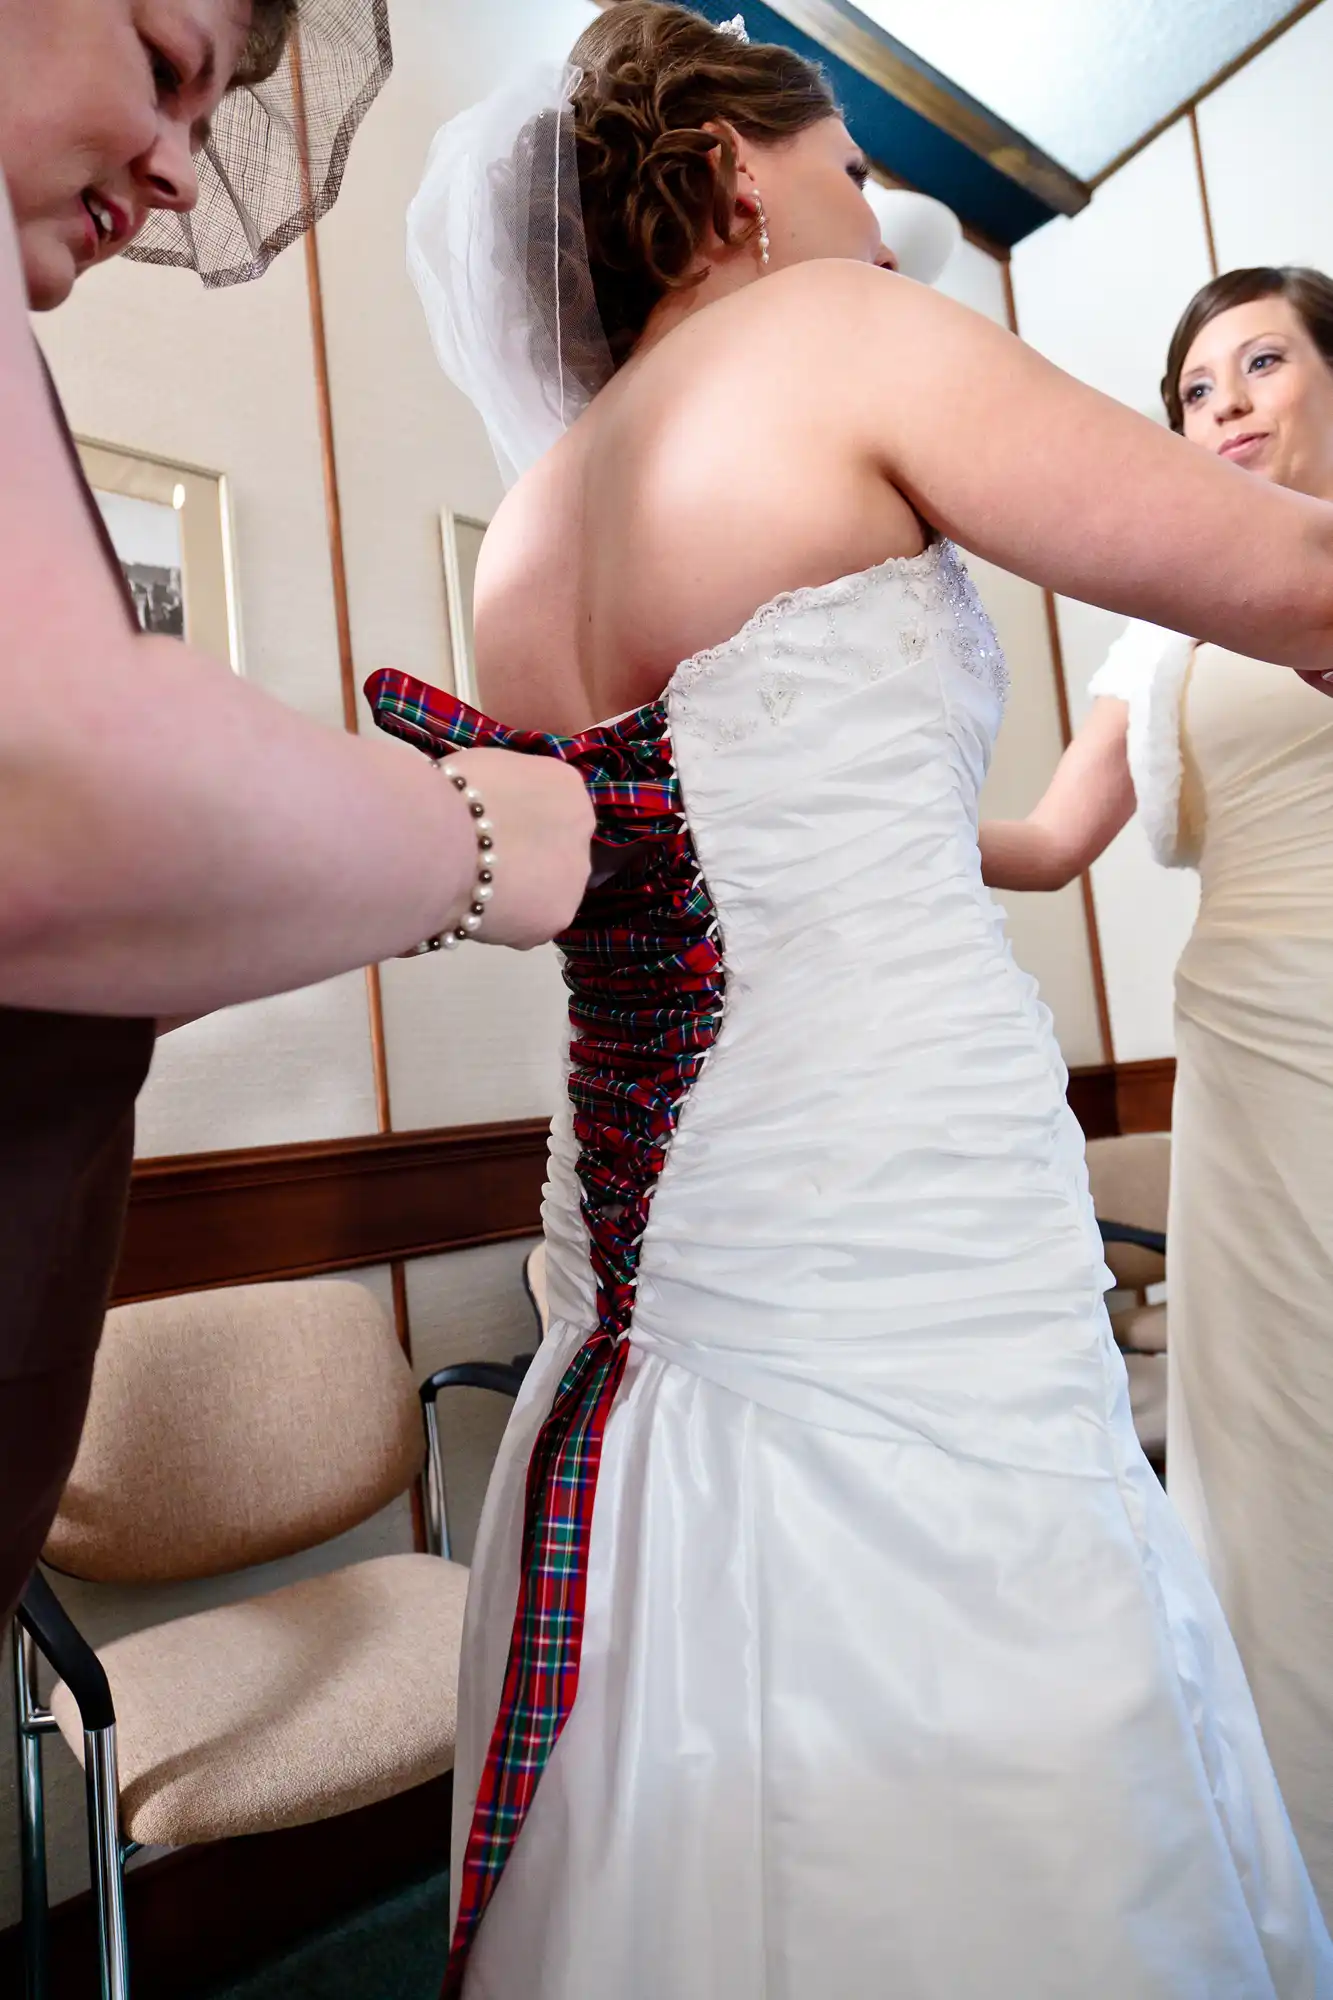 A bride being assisted with her dress by two women, featuring a white gown with red and plaid corset lacing in a room with beige chairs.